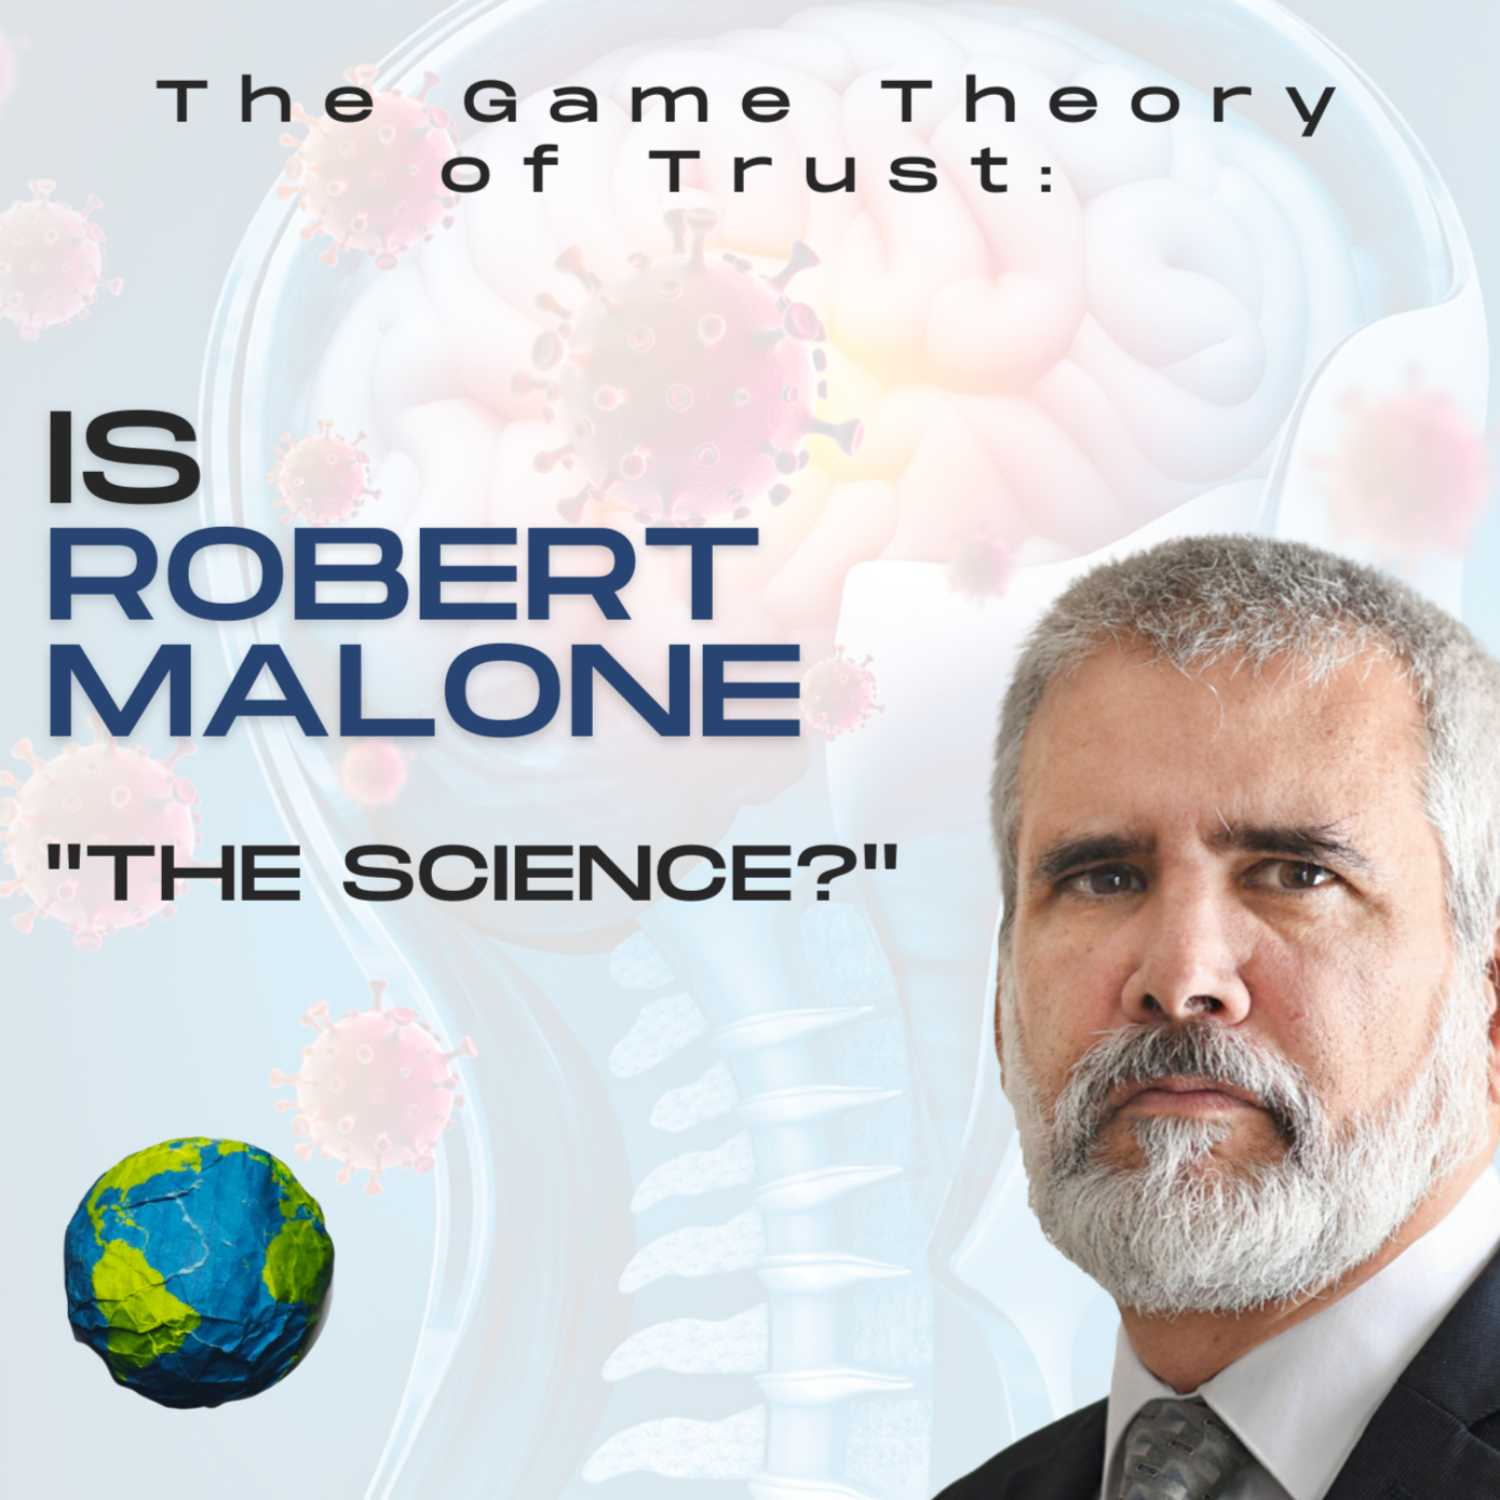 The Game Theory of Trust: Is Robert Malone ”The Science?”